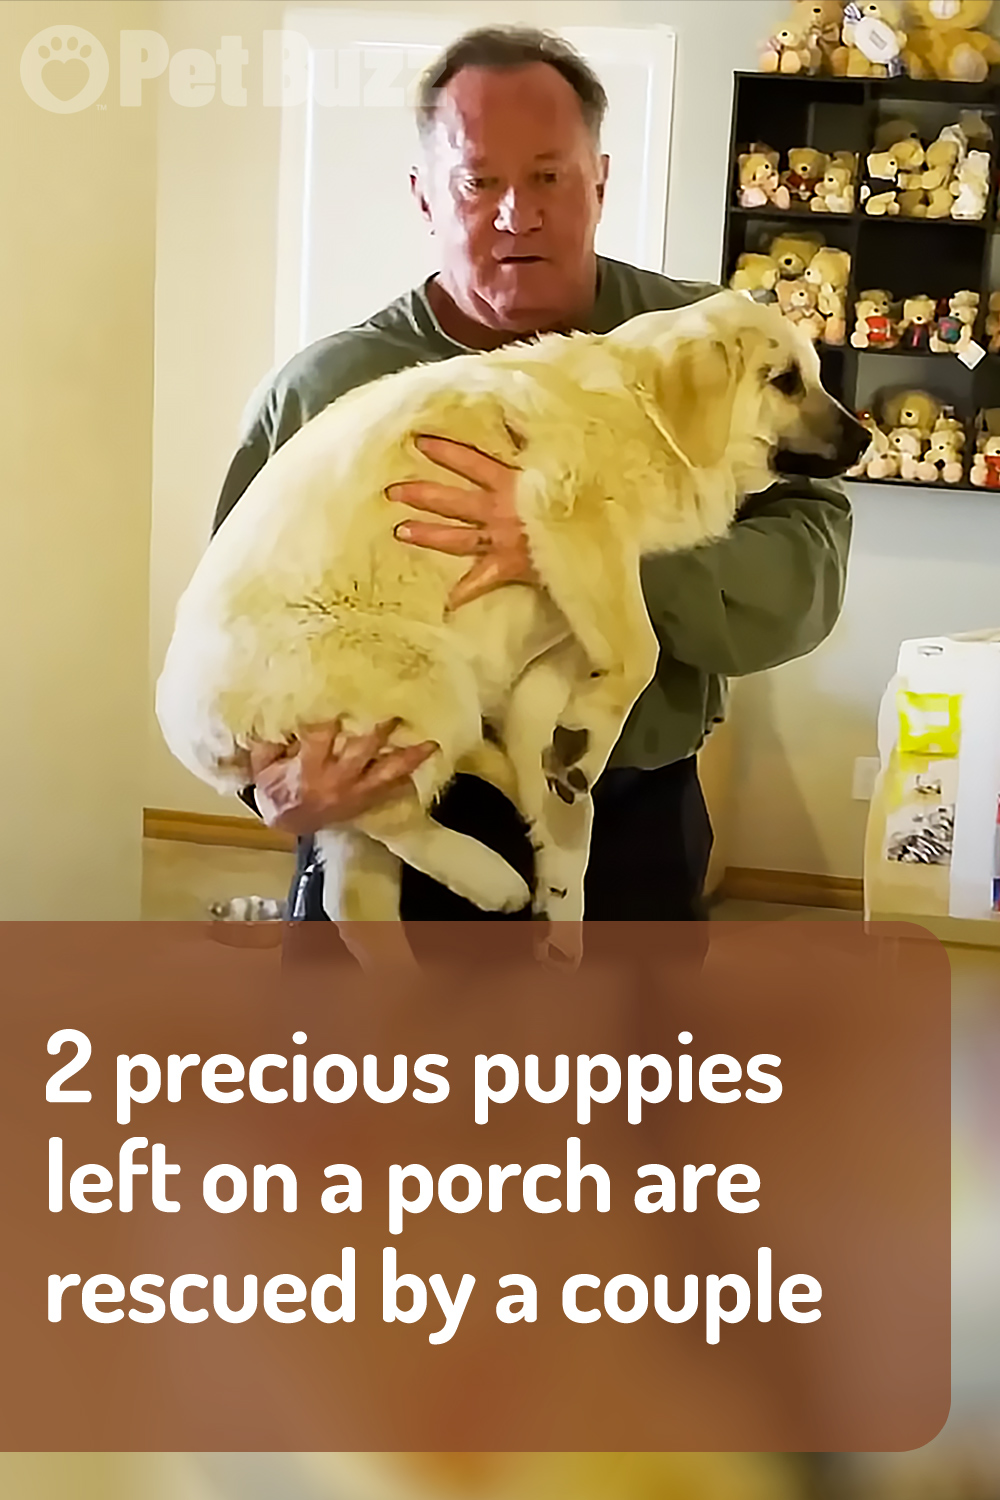 2 precious puppies left on a porch are rescued by a couple